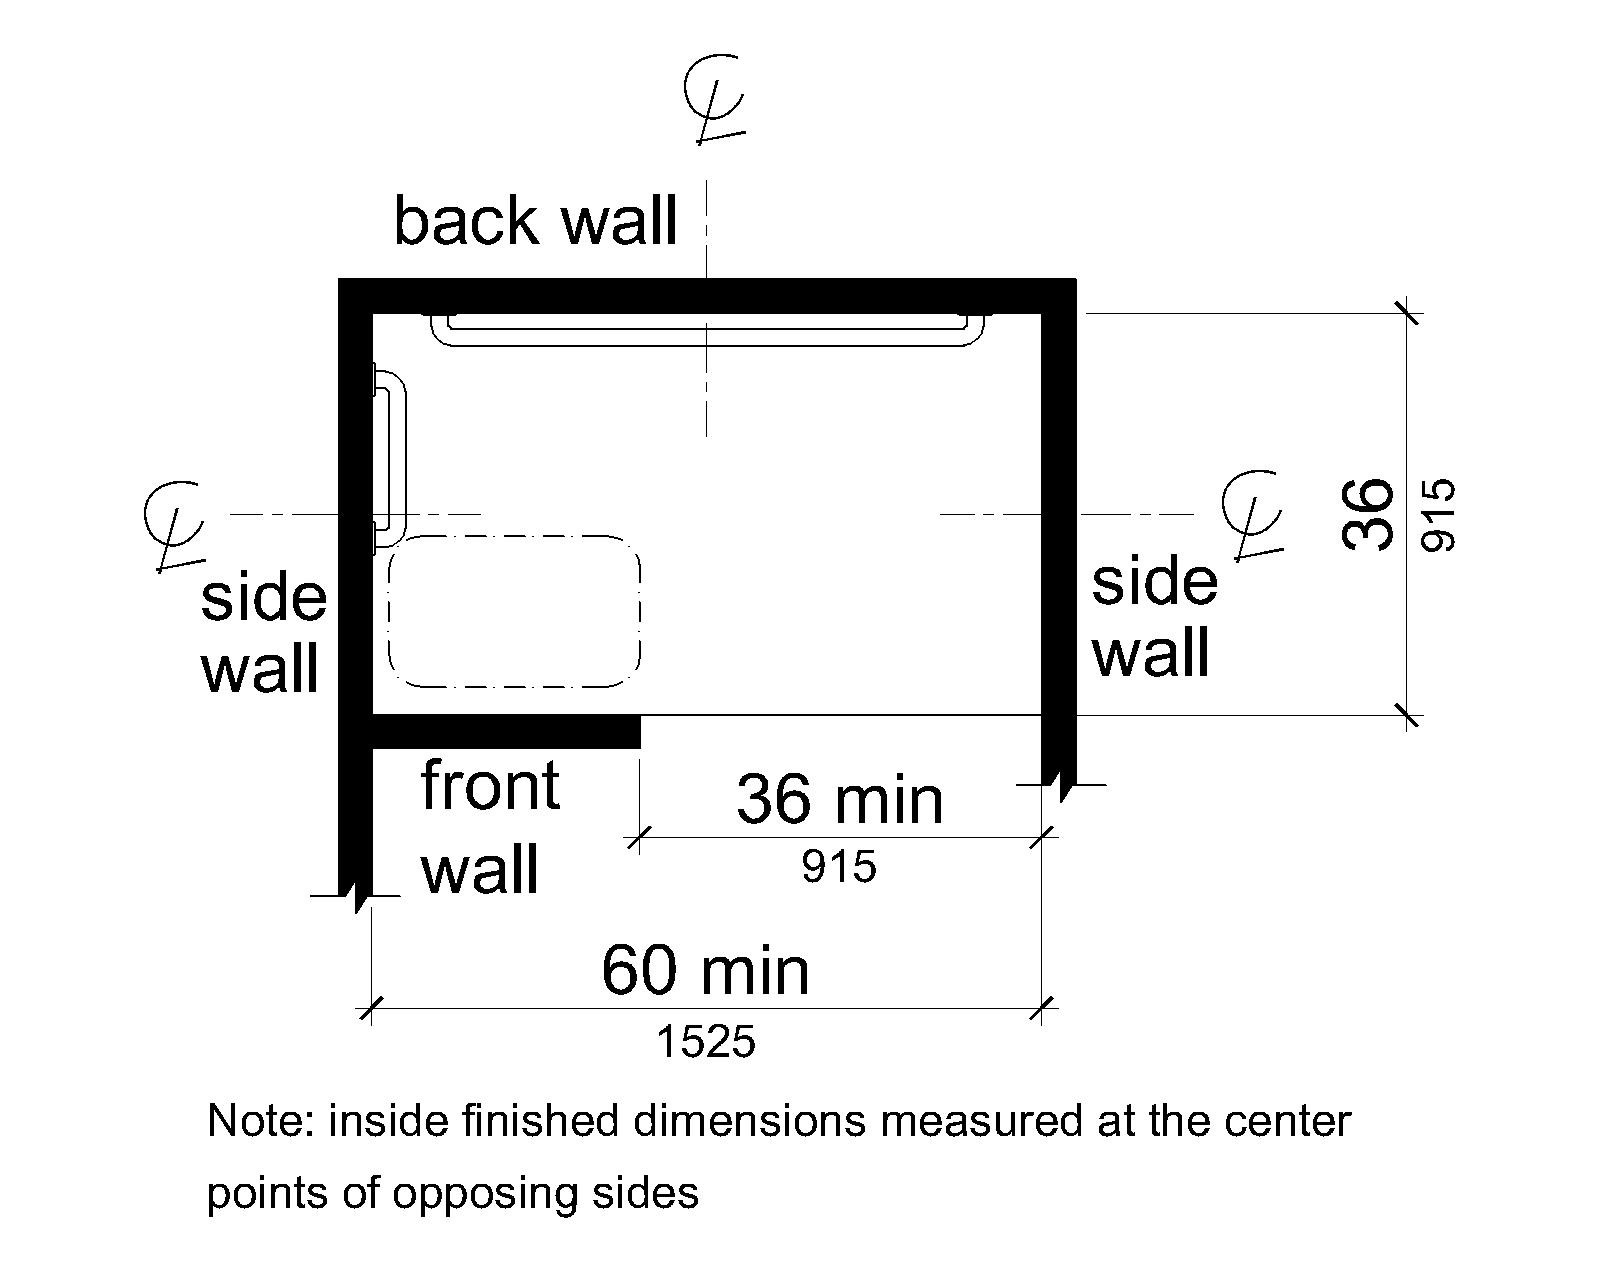 A plan view shows the shower compartment is 36 inches (915 mm) wide absolute and 60 inches (1525 mm) deep minimum. A 36 inch (915 mm) wide minimum entry is provided on one long wall. A seat is provided adjacent to the entry on the same wall.